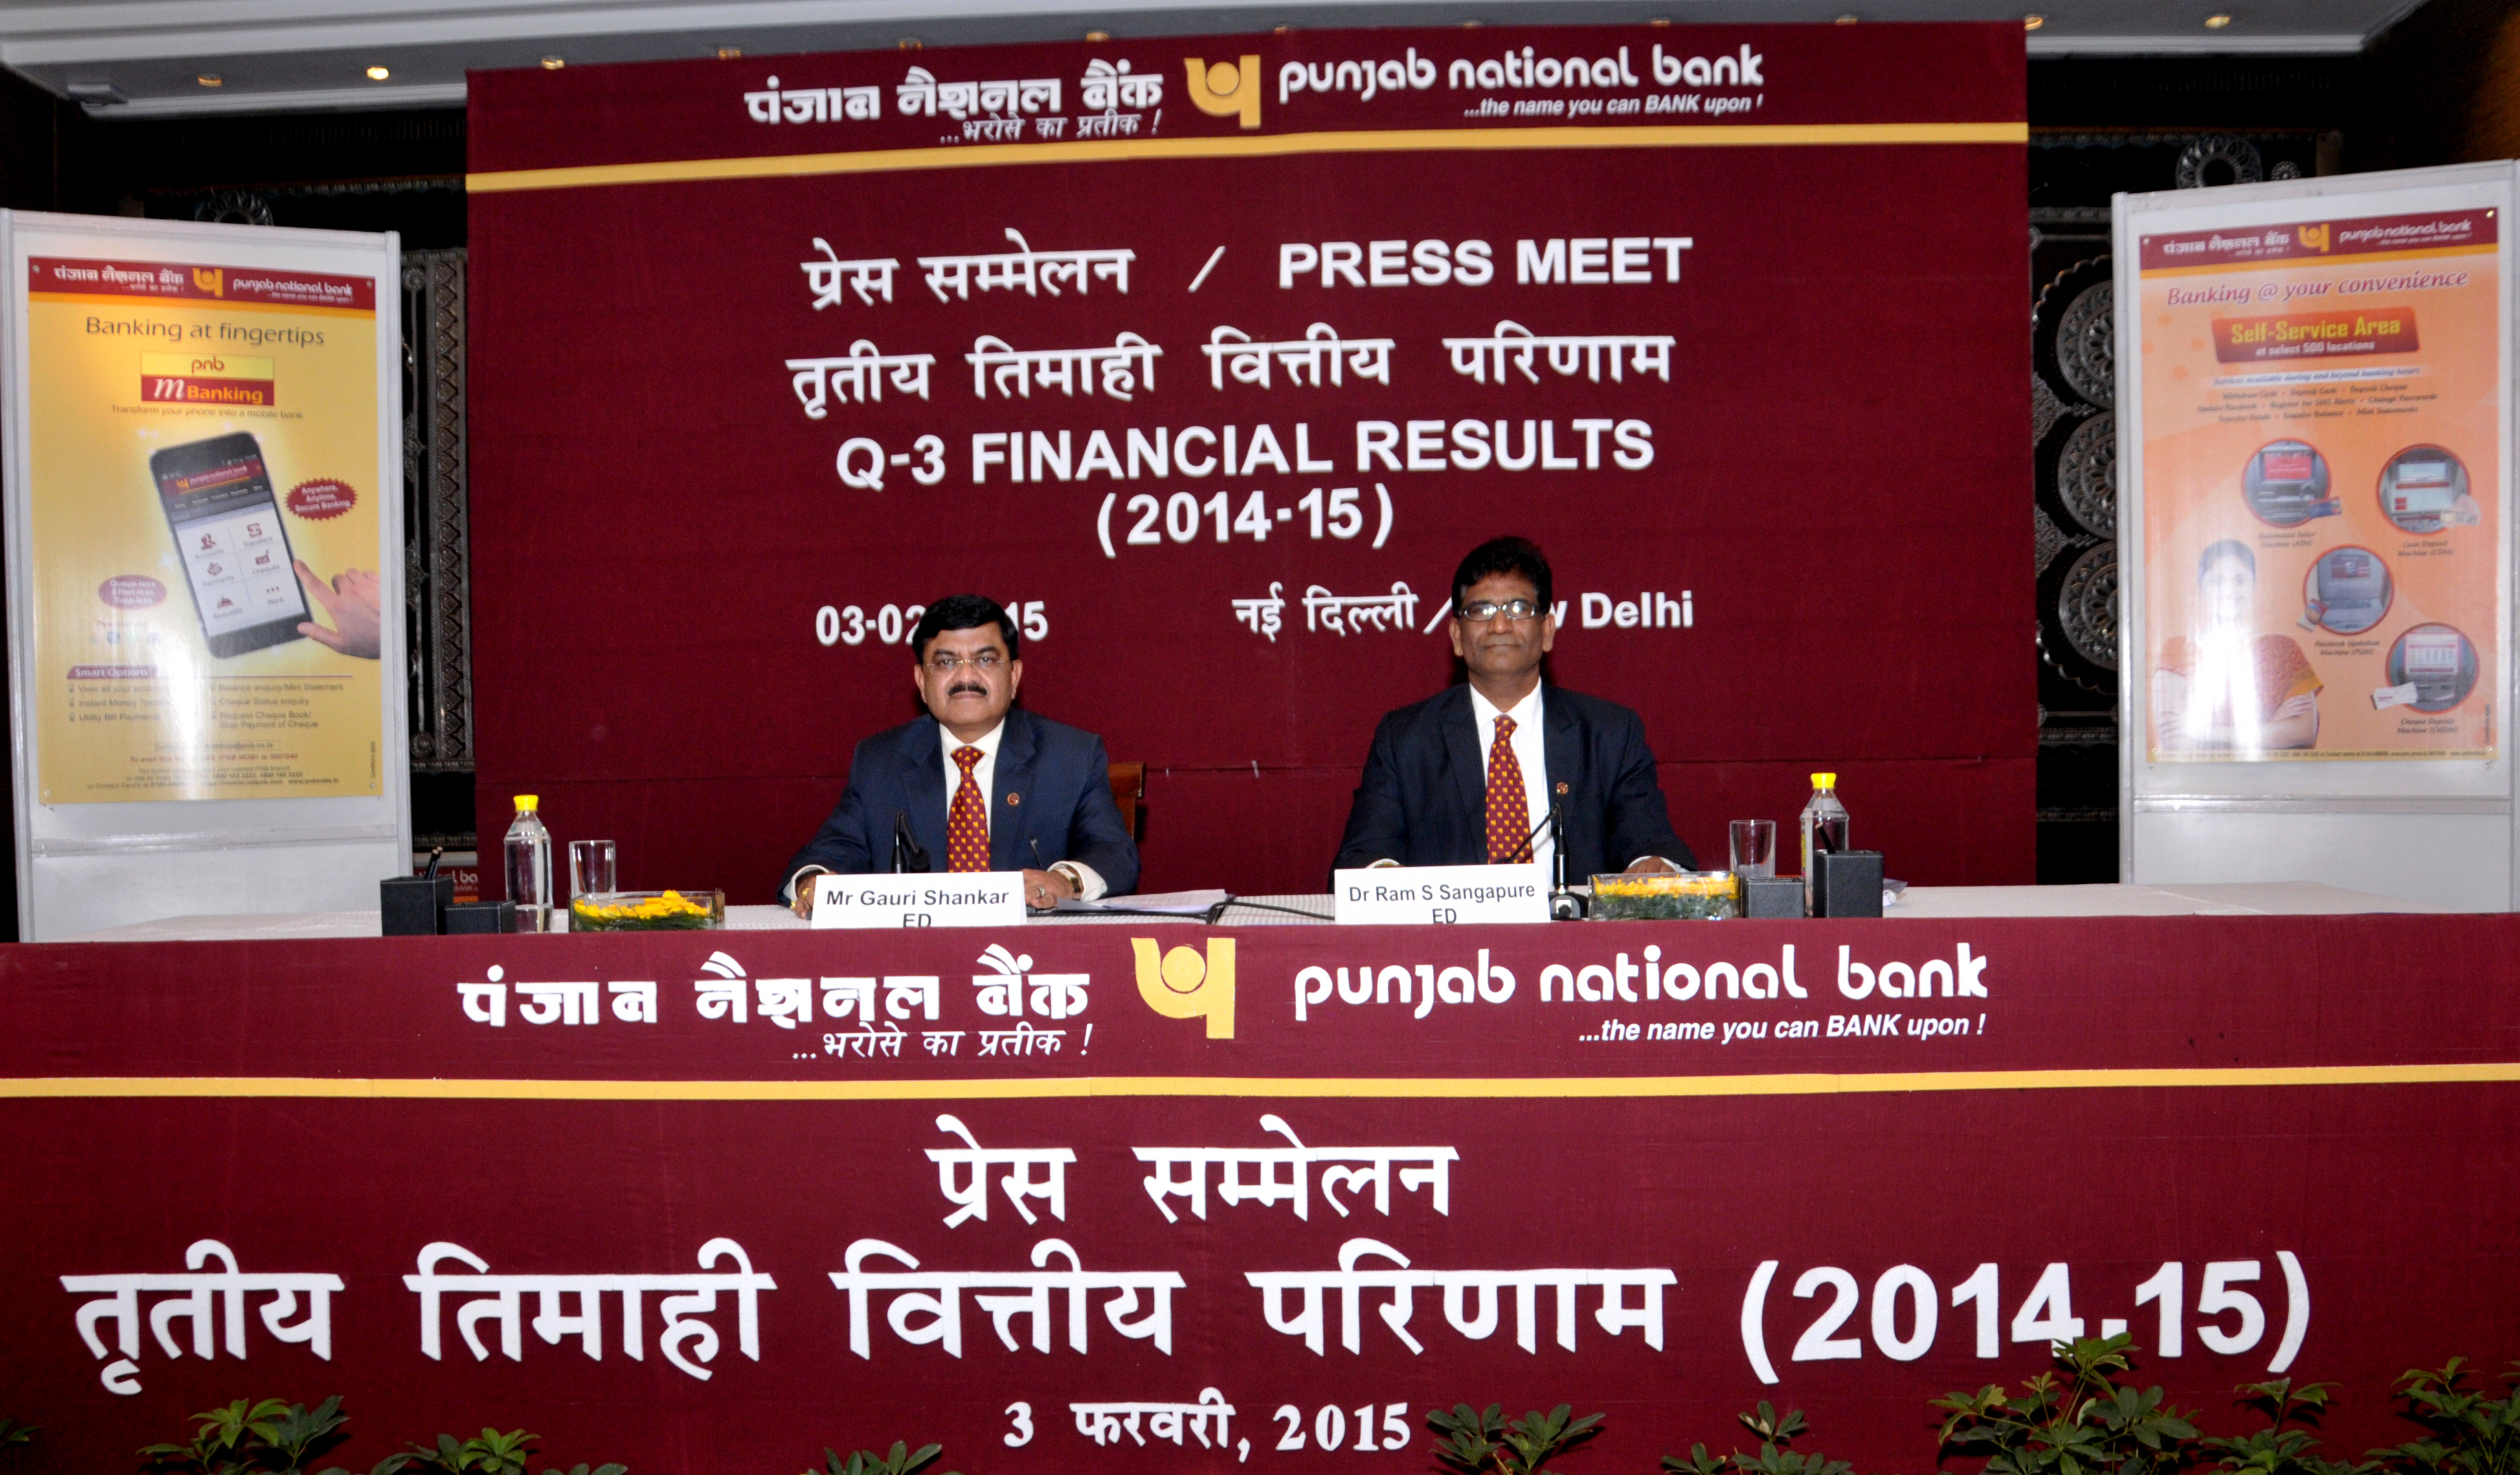 10 CRORE ACCOUNTS IN THE KITTY -PNB DISPLAYS  A FABULOUS ACHIEVEMENT